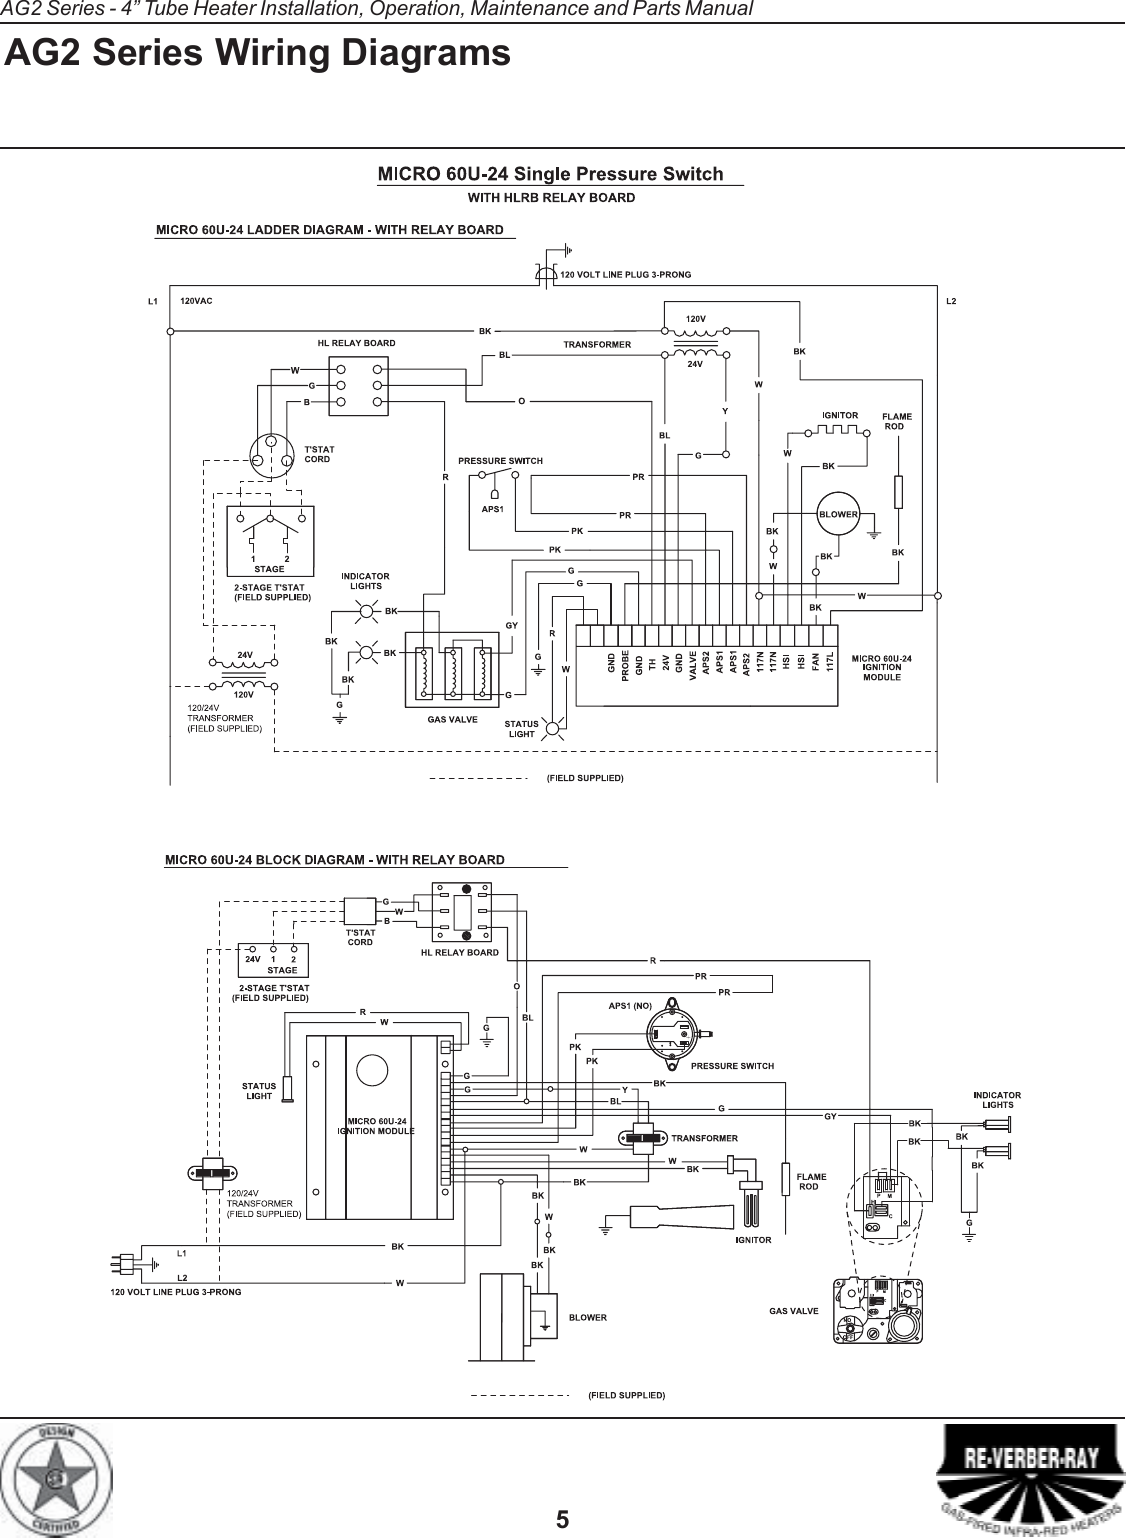 Page 5 of 12 - Detroit-Electric Detroit-Electric-Detroit-Electric-Gas-Heater-V-5-05-Users-Manual- AG-2 Insert 9-03  Detroit-electric-detroit-electric-gas-heater-v-5-05-users-manual